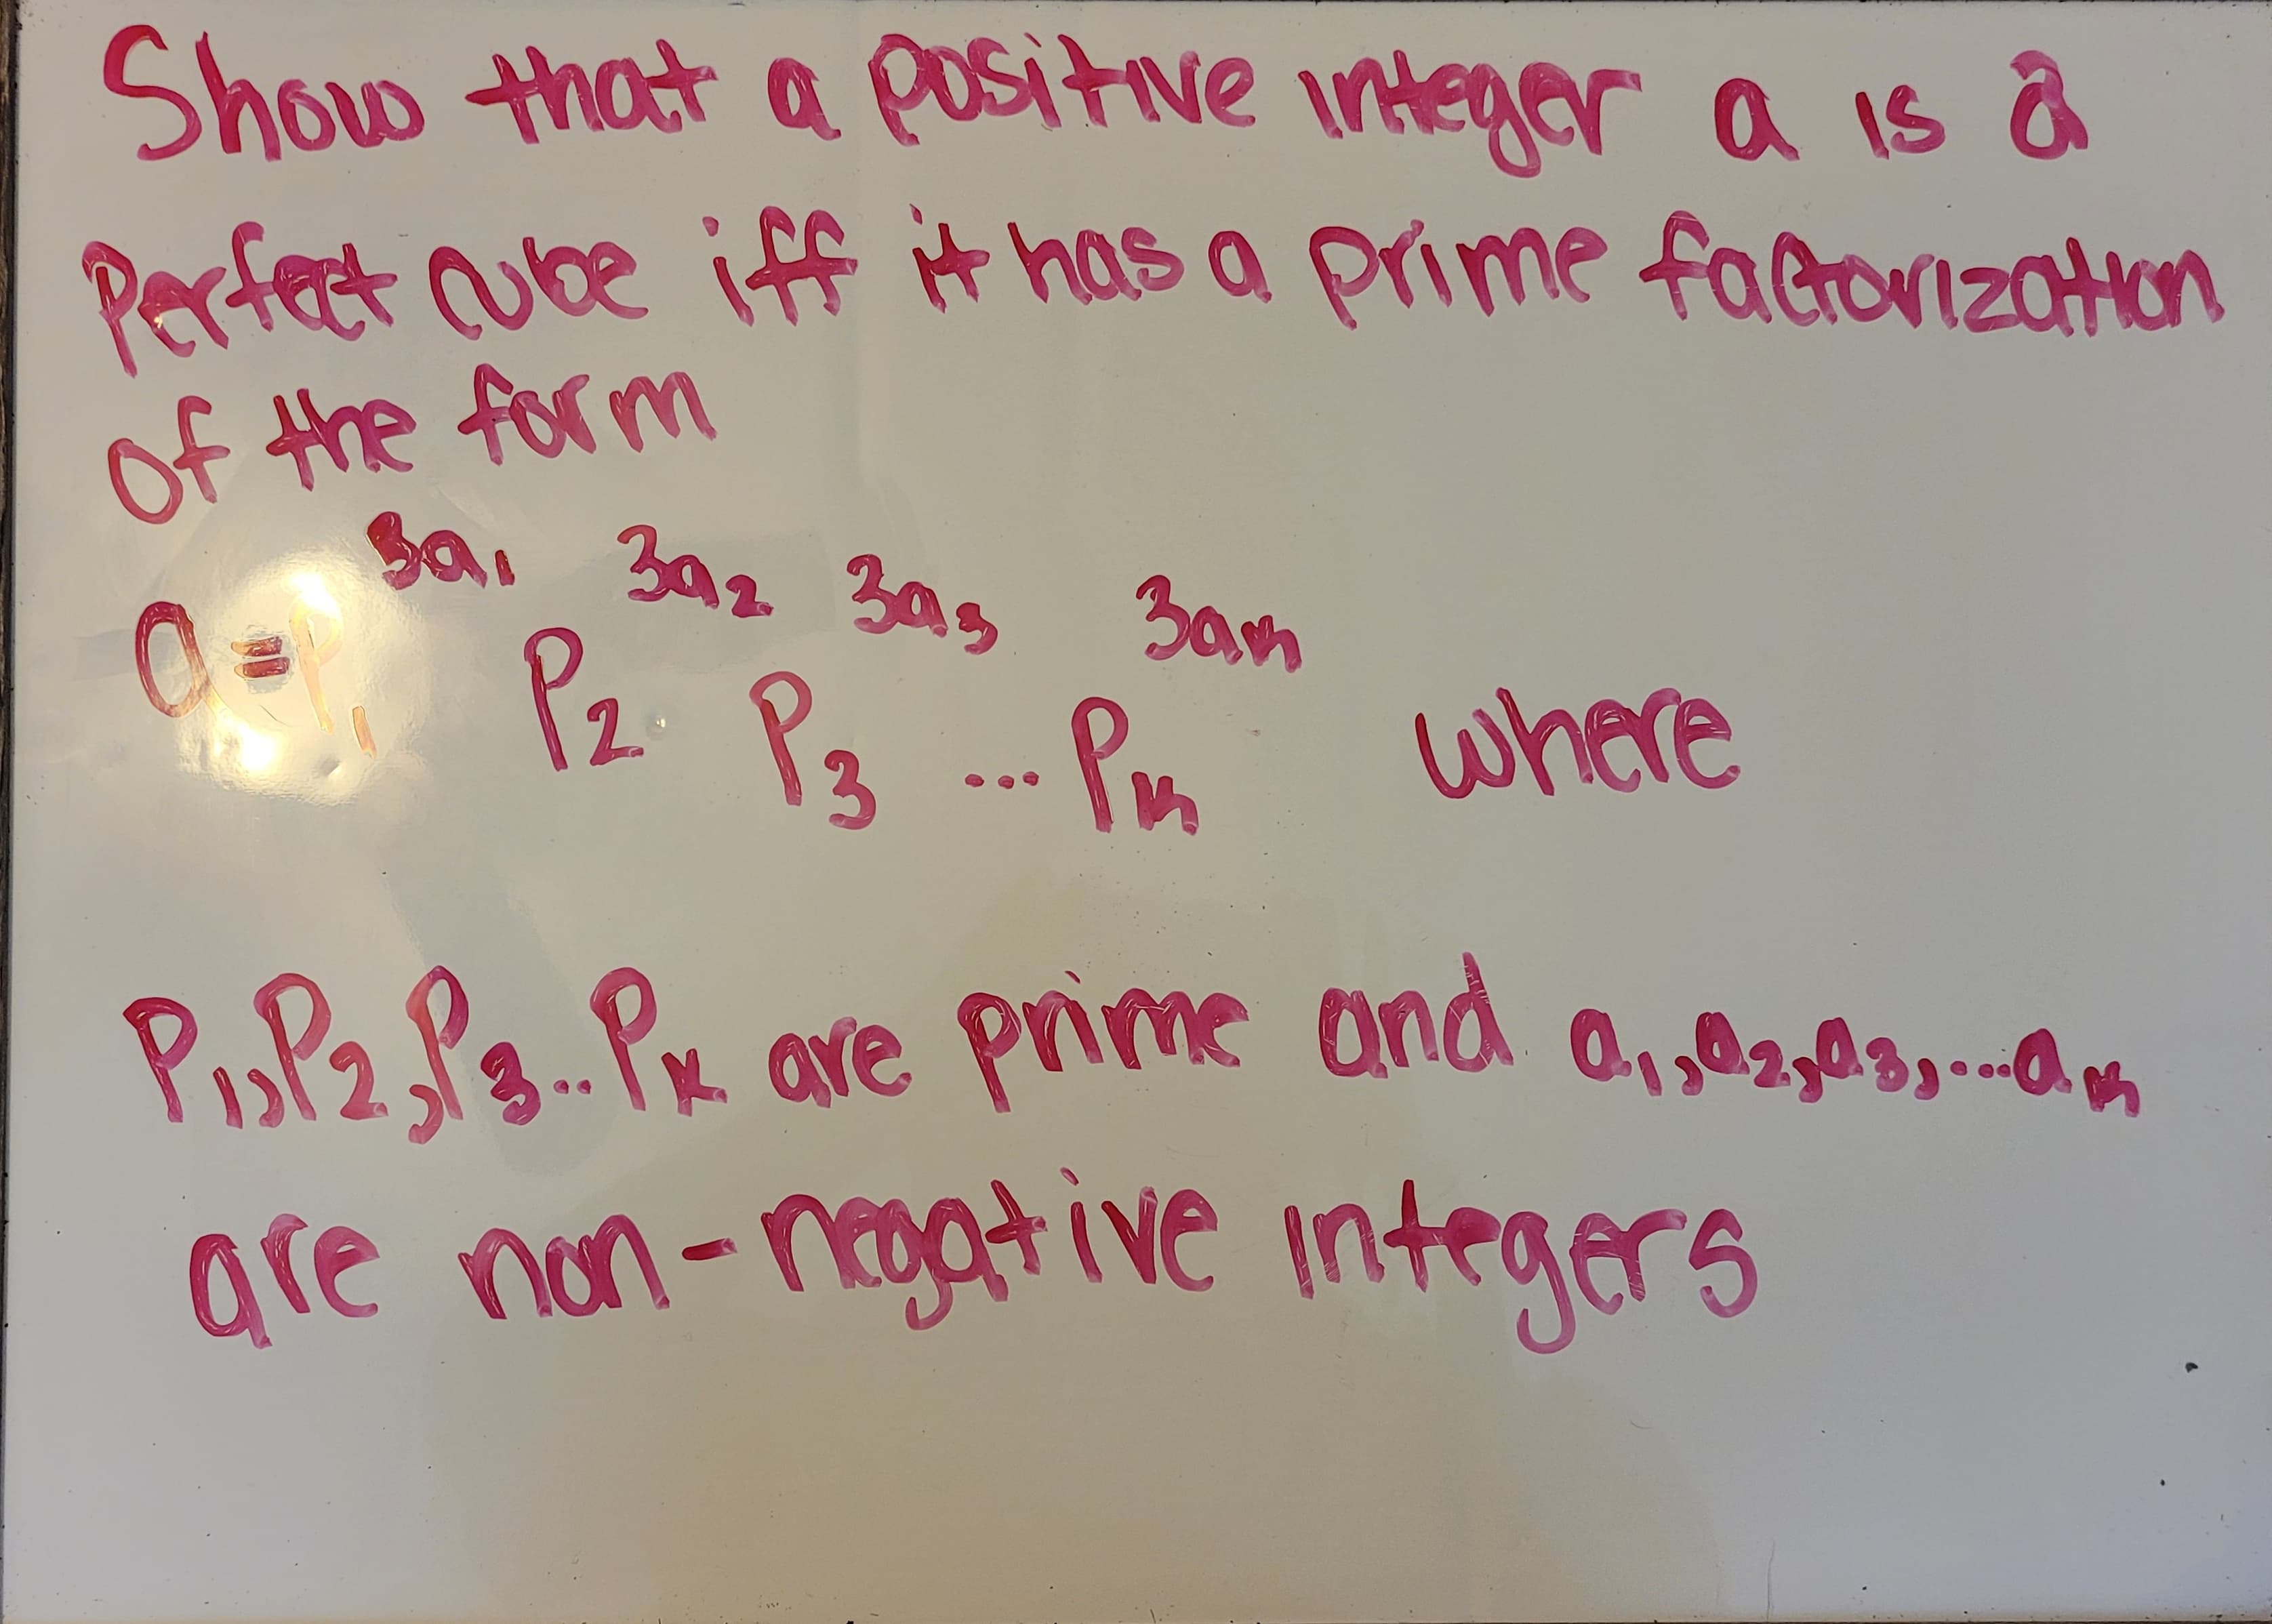 Show that a positive integer a is &
Perfect ube iff it has a prime facorzation
of the form
sai 392 30g Bam
P2 Pz .- Pm
where
PioP2 Pg.Px are prime and
gre non-negative integers
